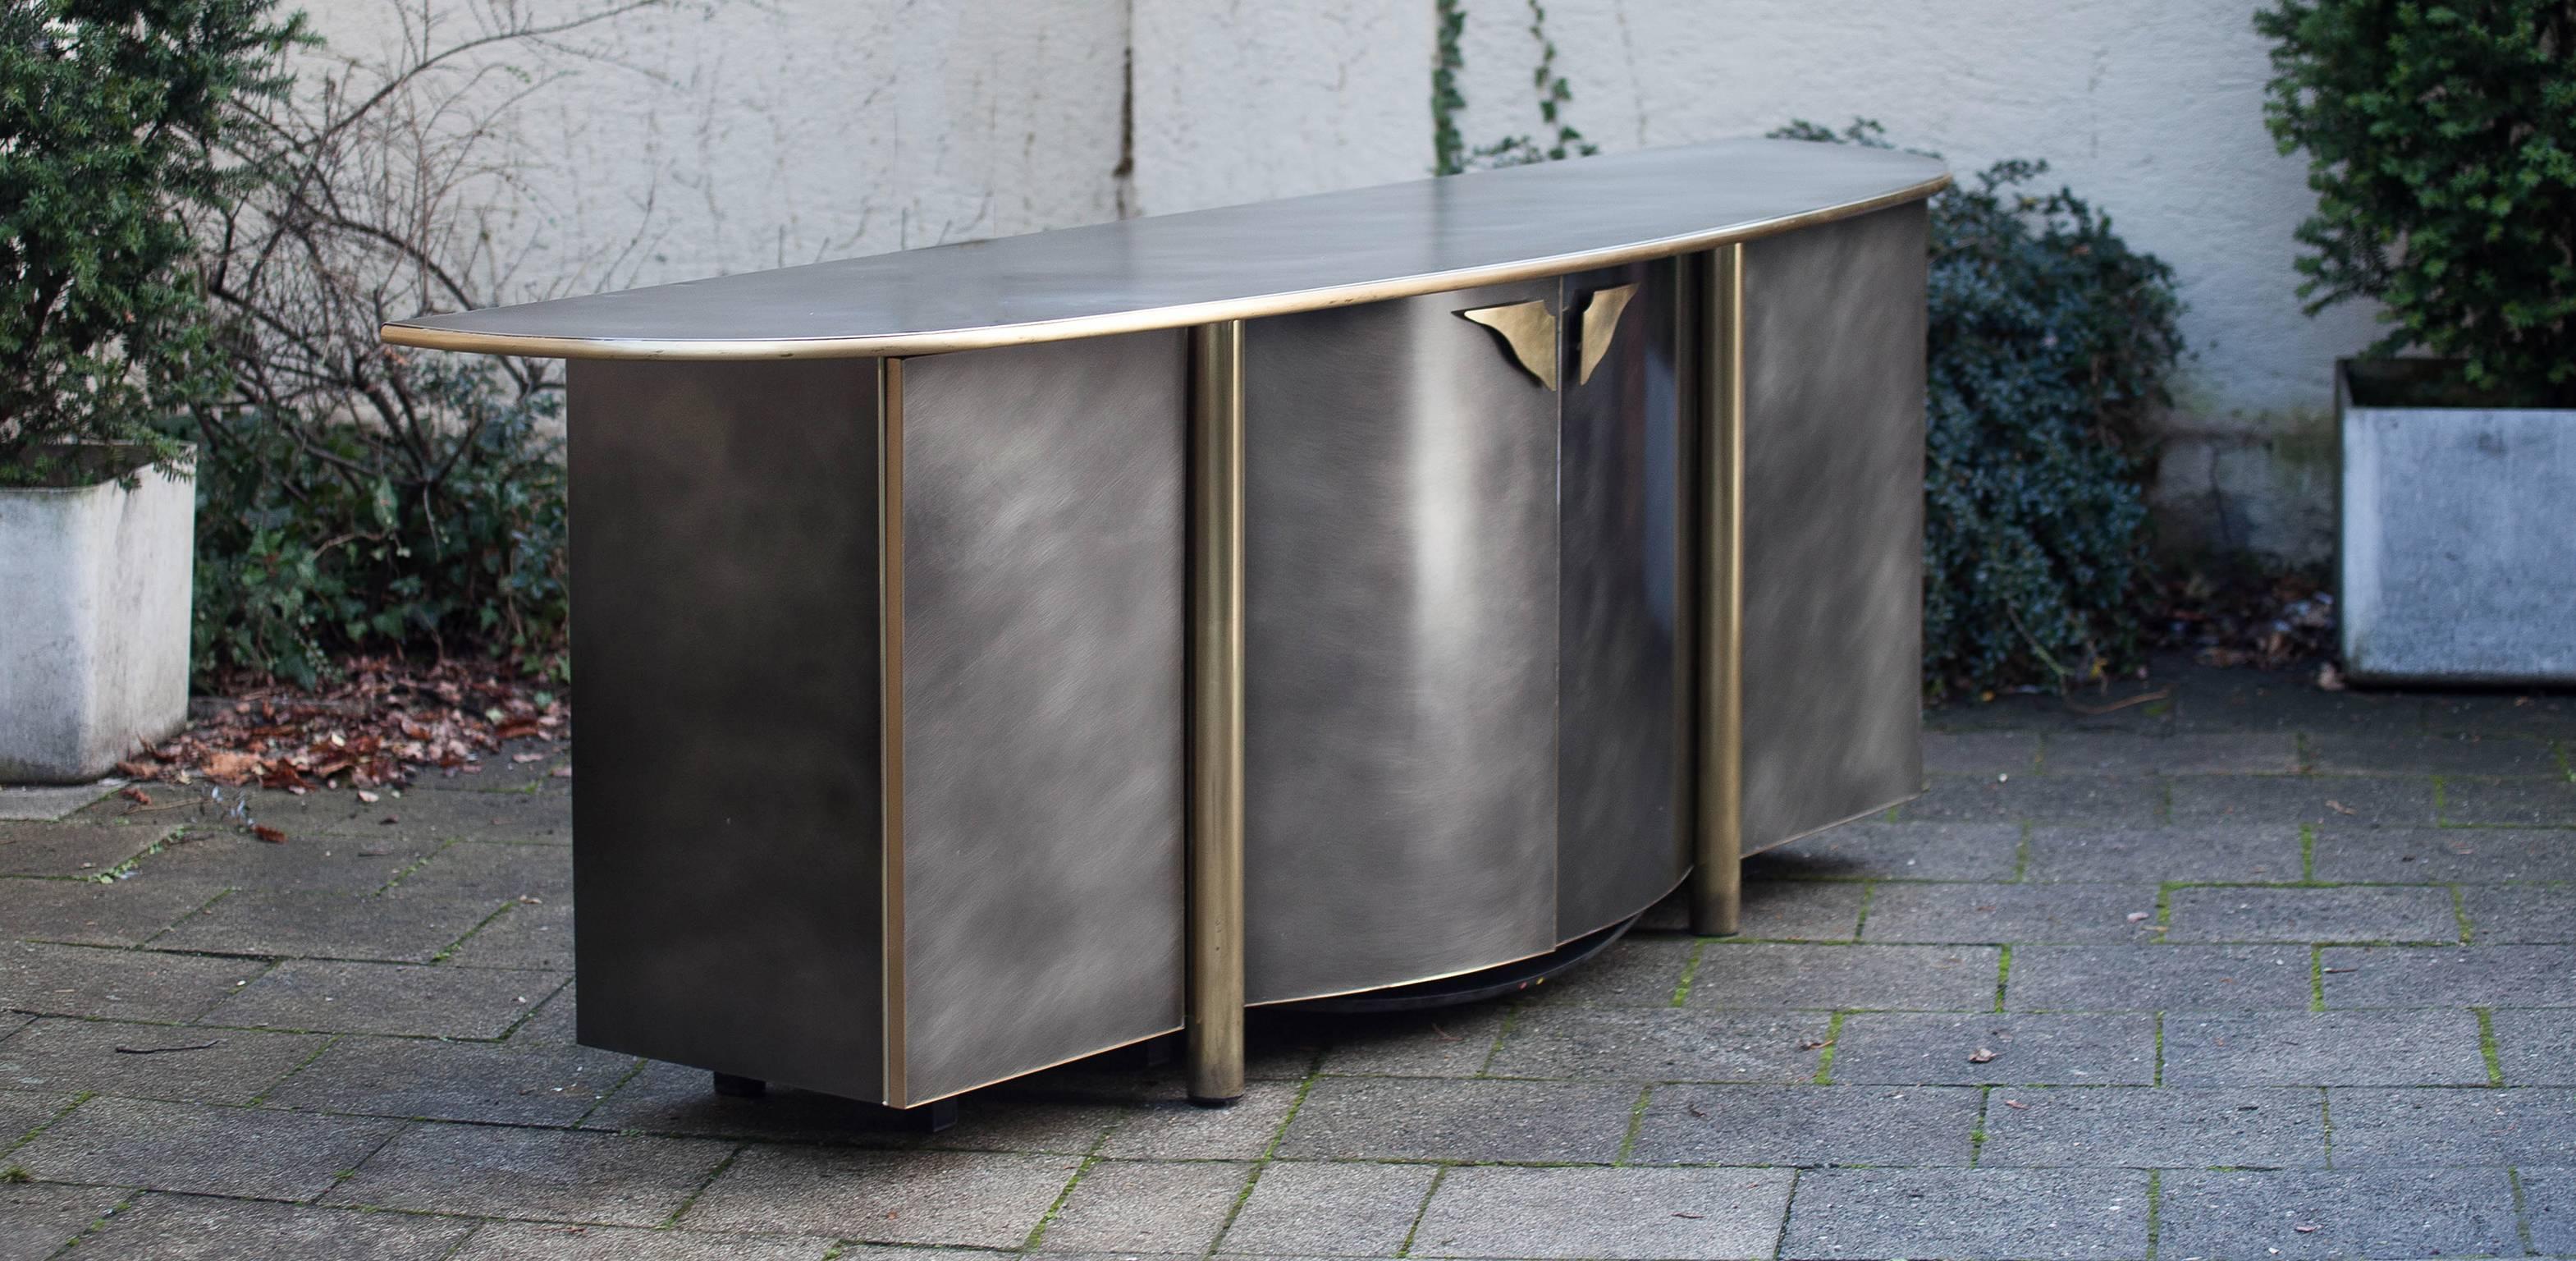 Glamorous Bicolor Cabinet Sideboard, attributed to Maison Jansen.
France, 1978.